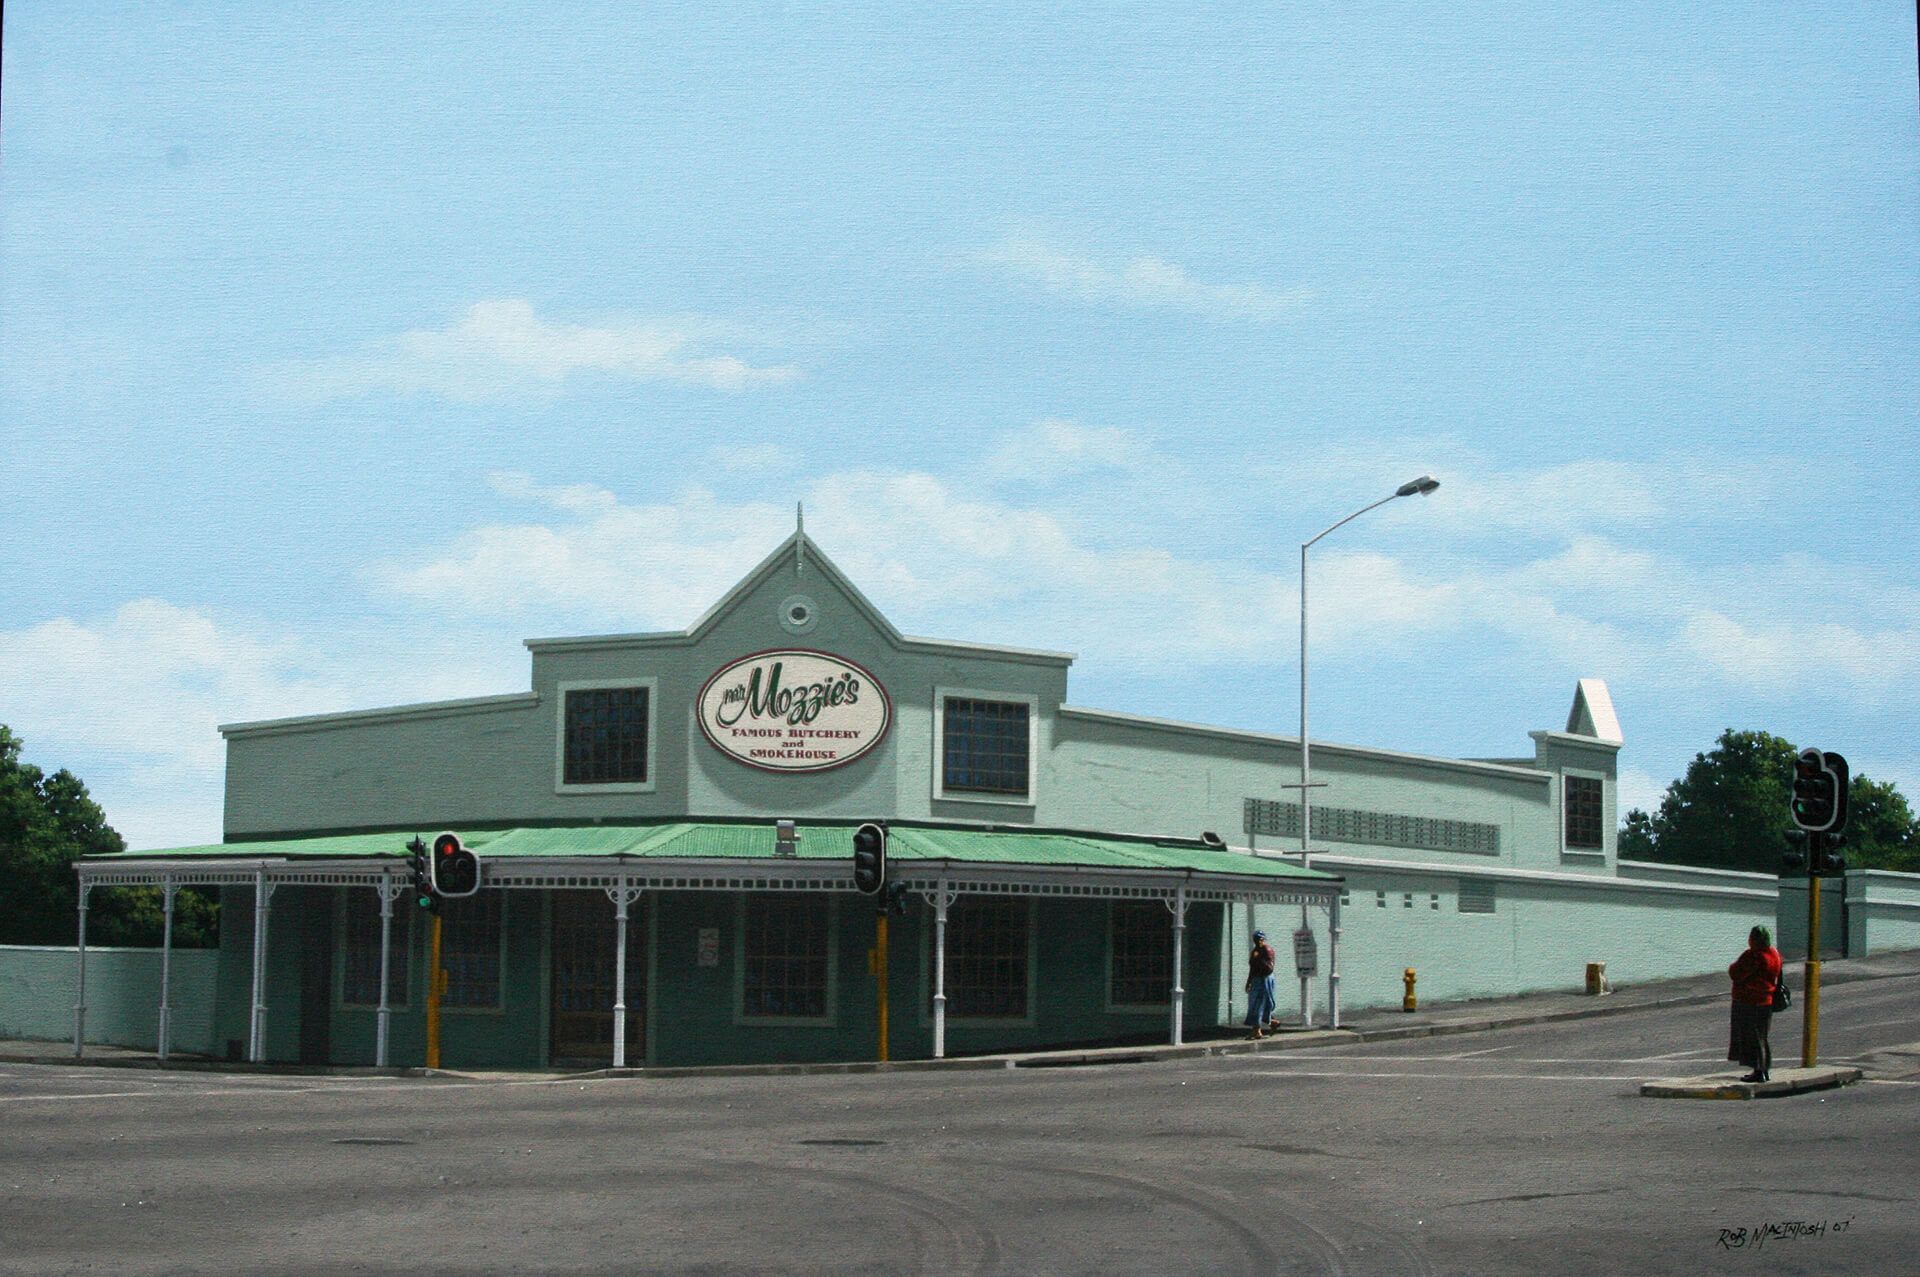 Photorealistic painting of a restaurant closed on Sundays